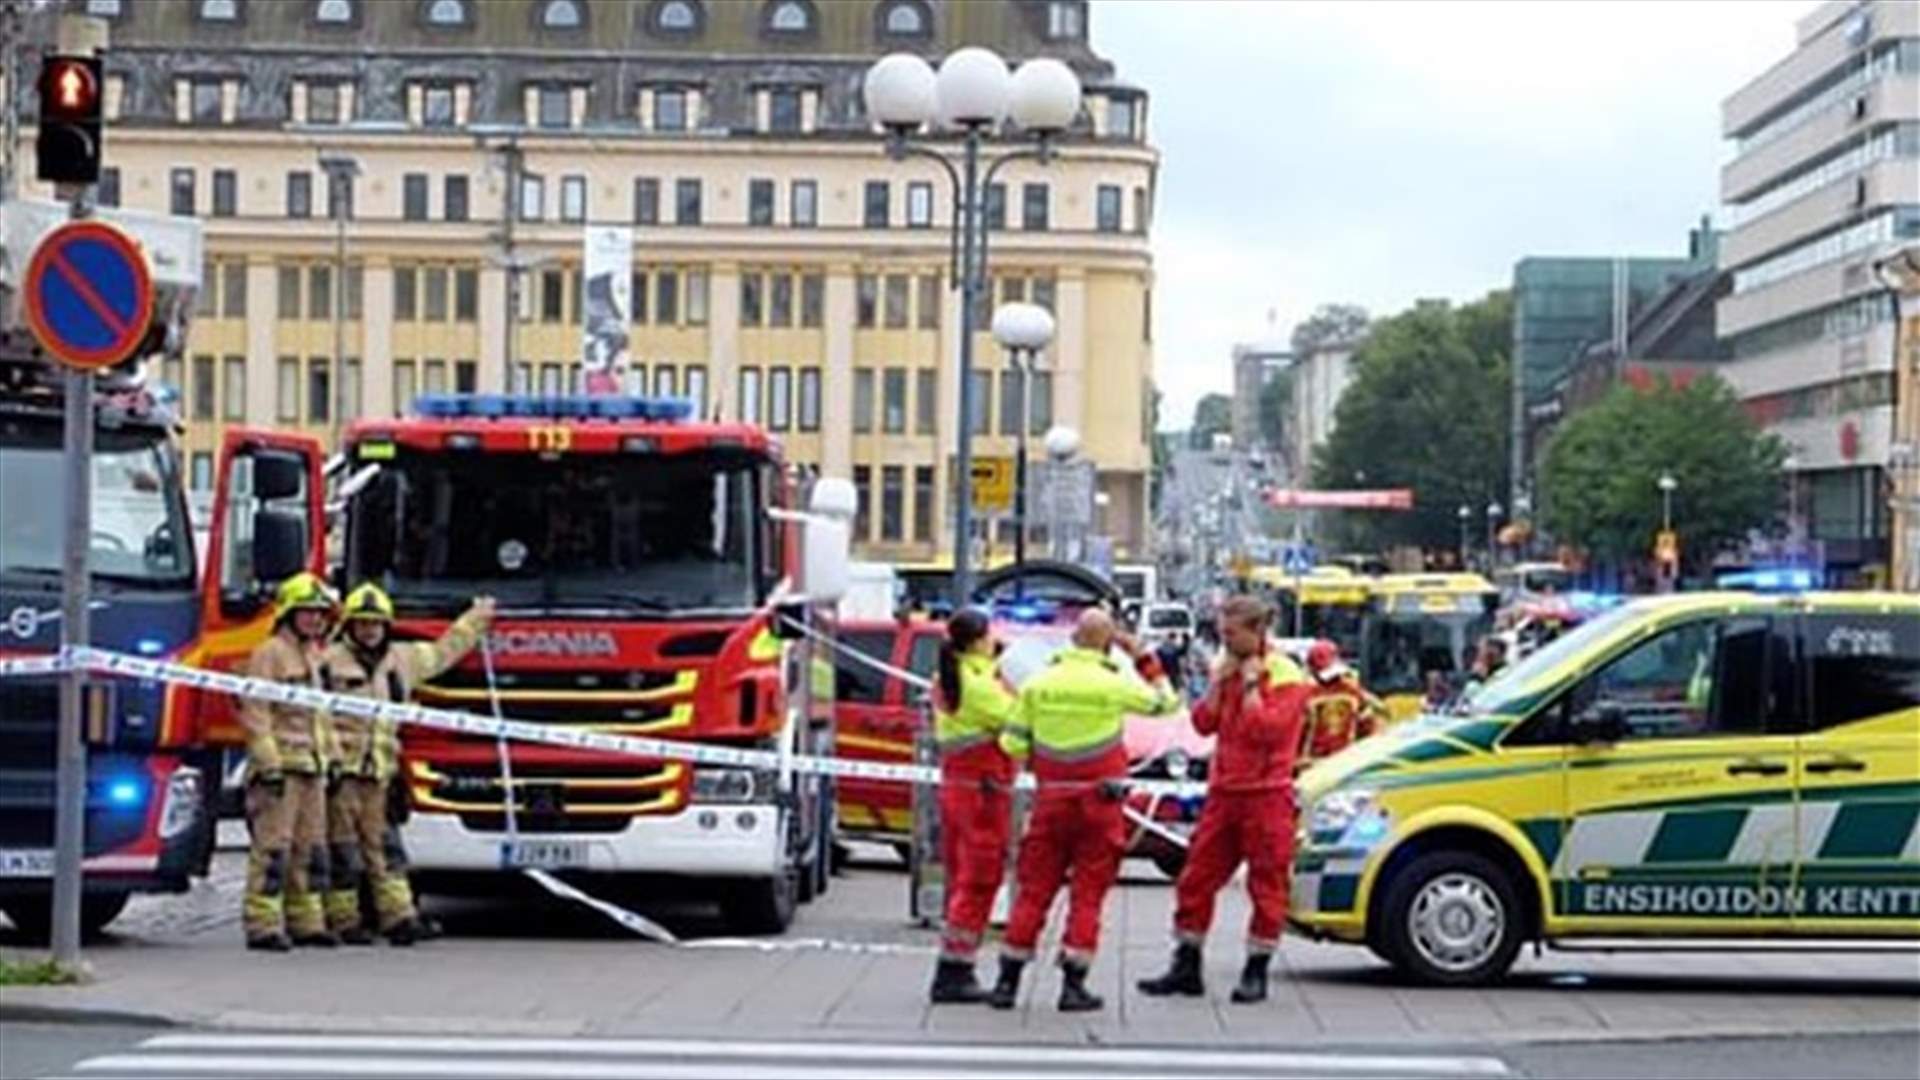 [VIDEO] Several people stabbed in Finnish city of Turku - police